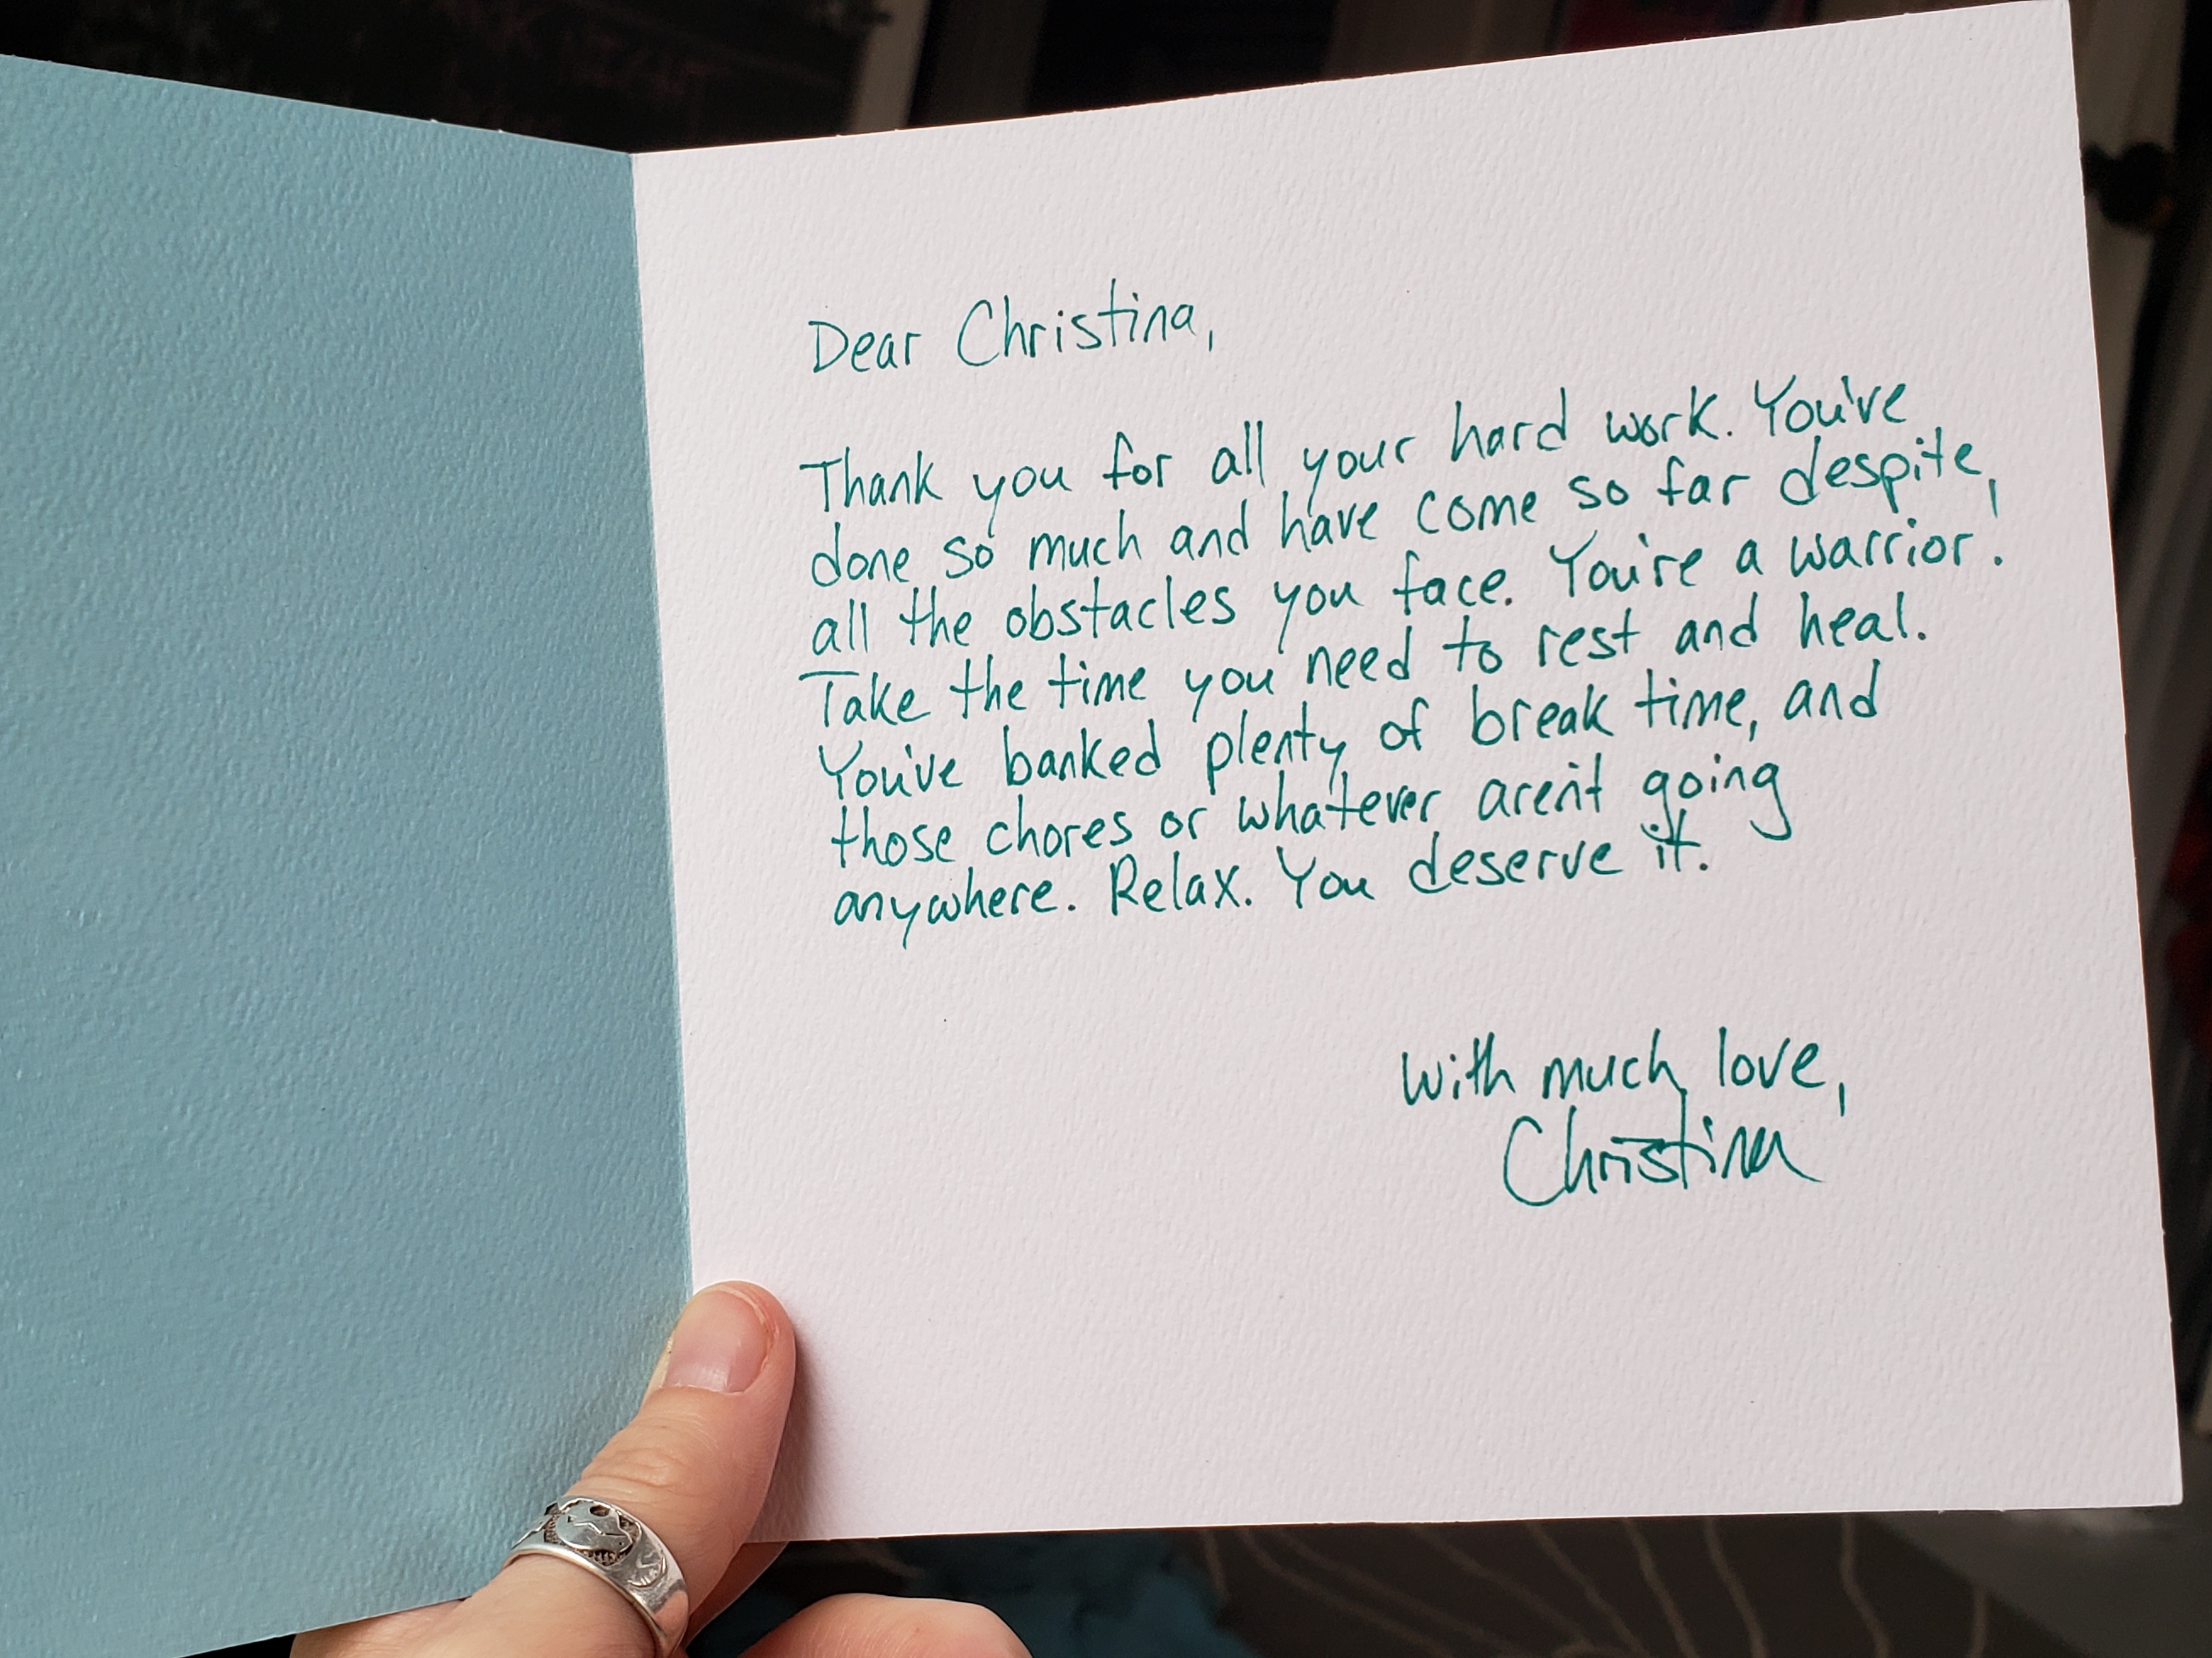 Christina's encouraging note to herself.